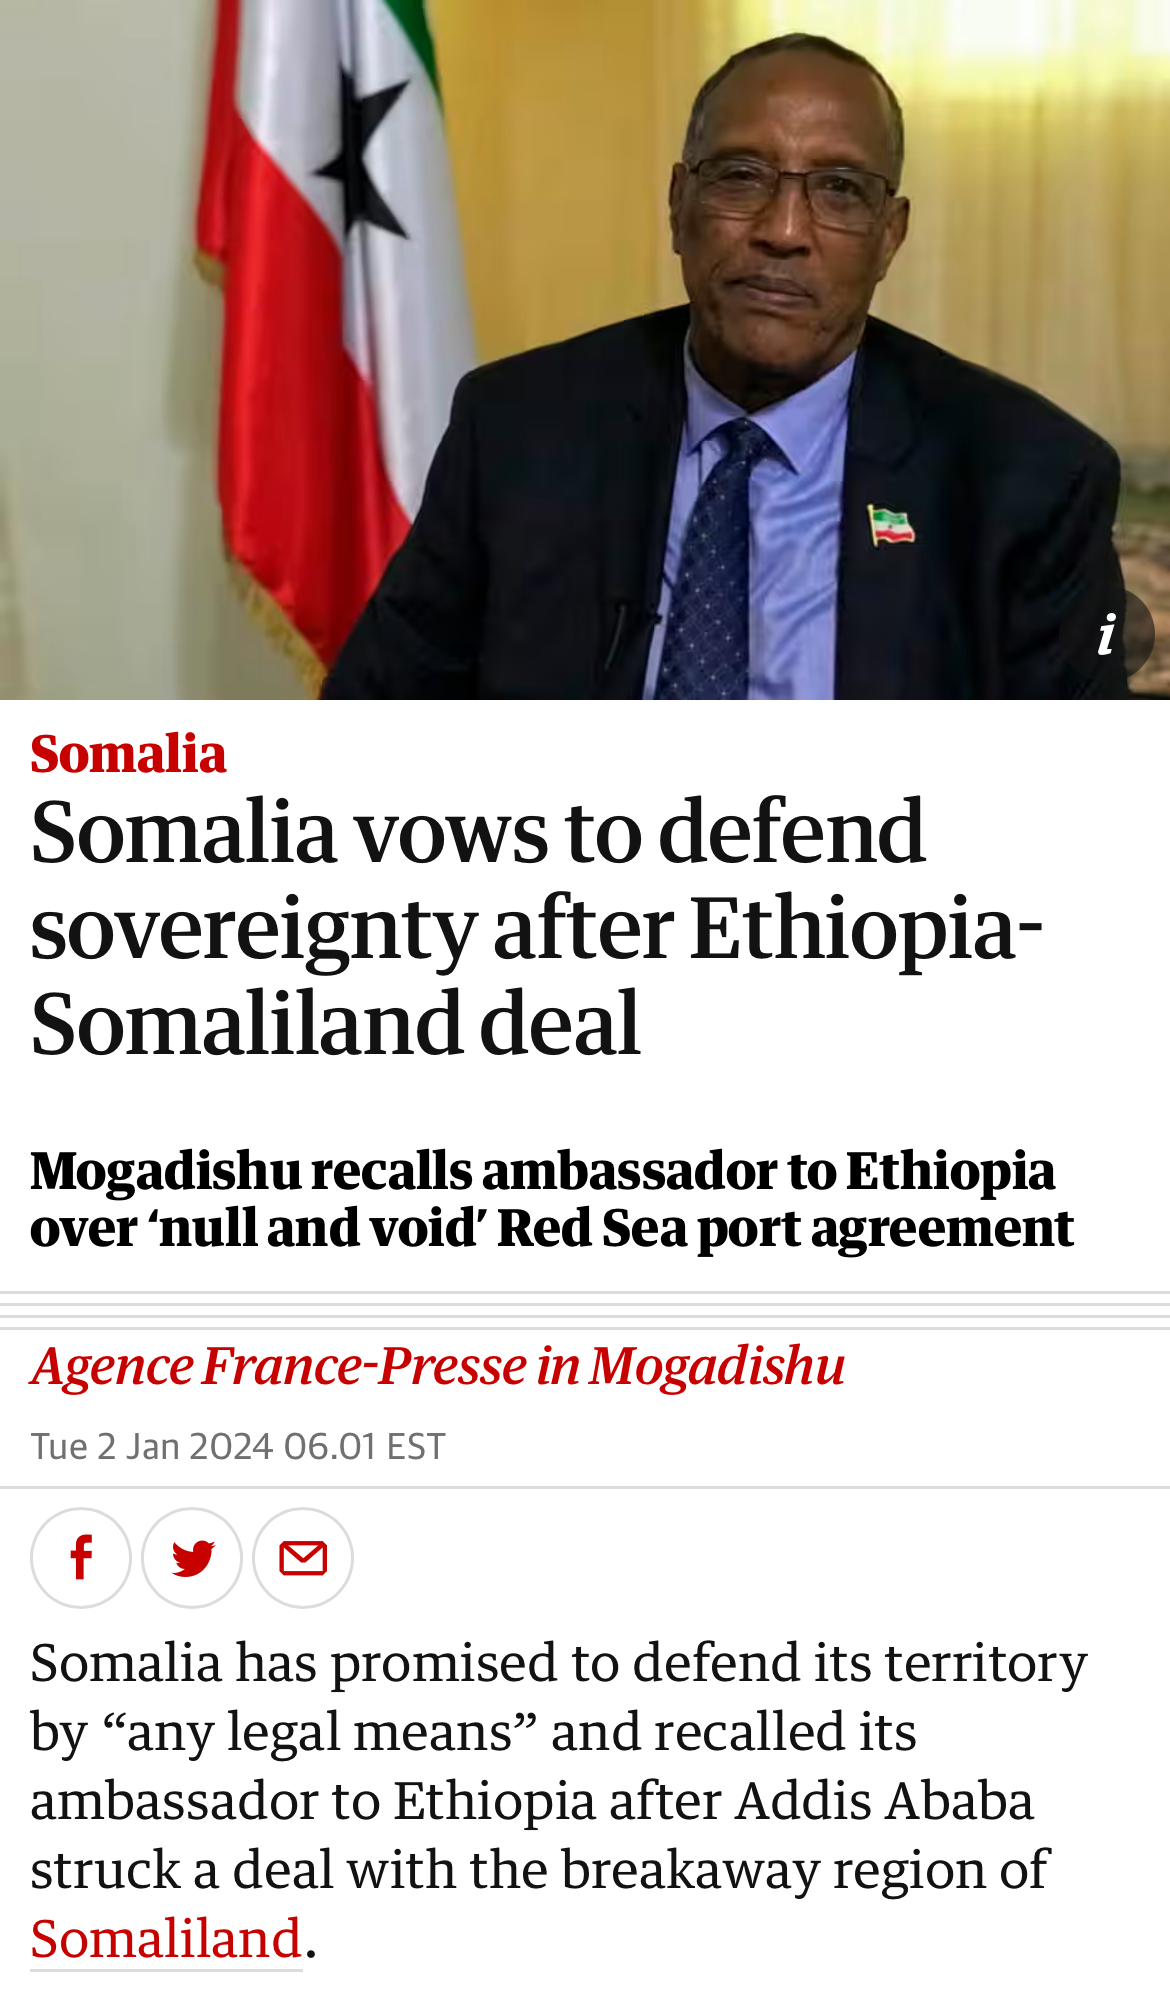 Somalia vows to defend sovereignty after Ethiopia-Somaliland deal  Somalia  The Guardian.jpeg.png